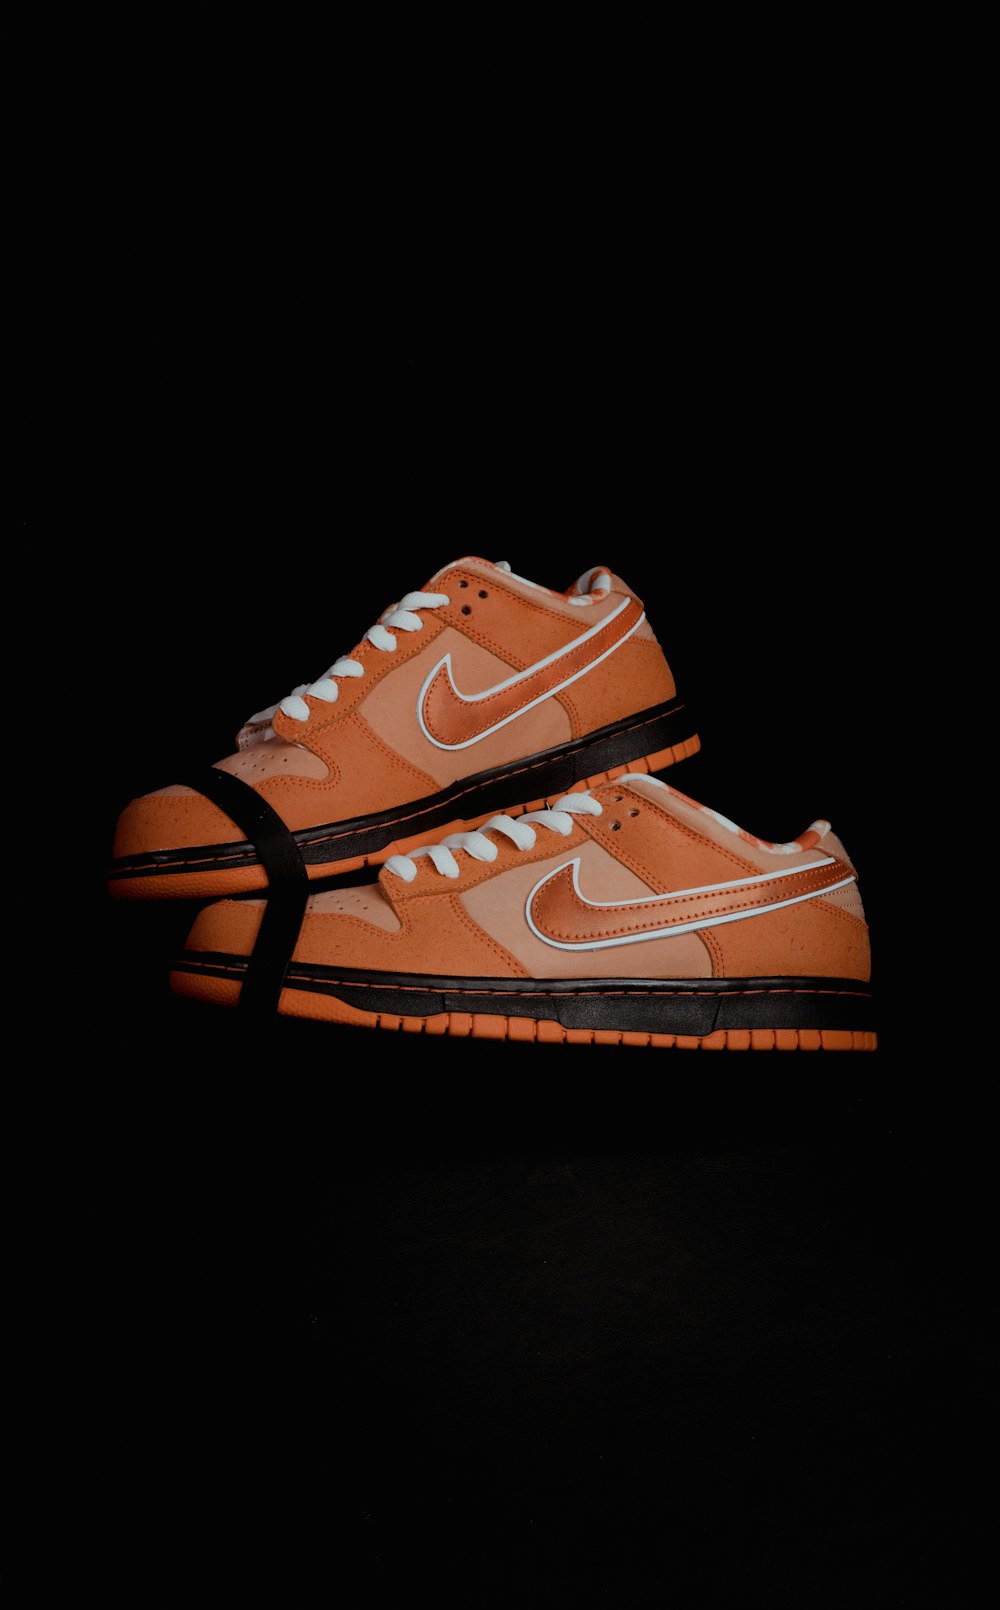 a pair of orange sneakers on a black background